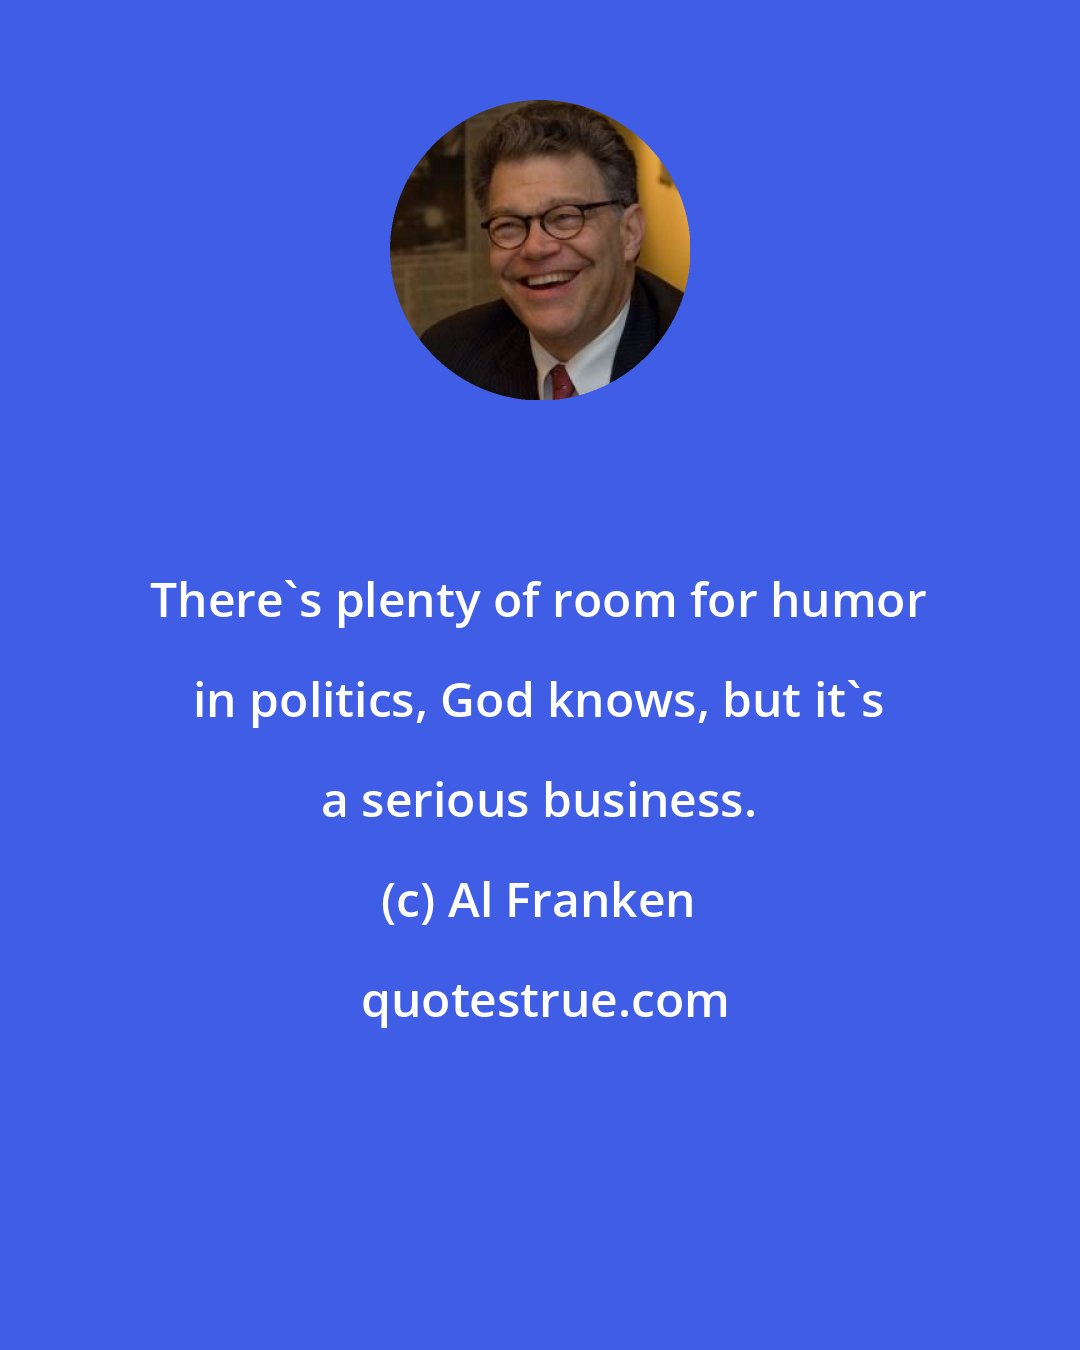 Al Franken: There's plenty of room for humor in politics, God knows, but it's a serious business.